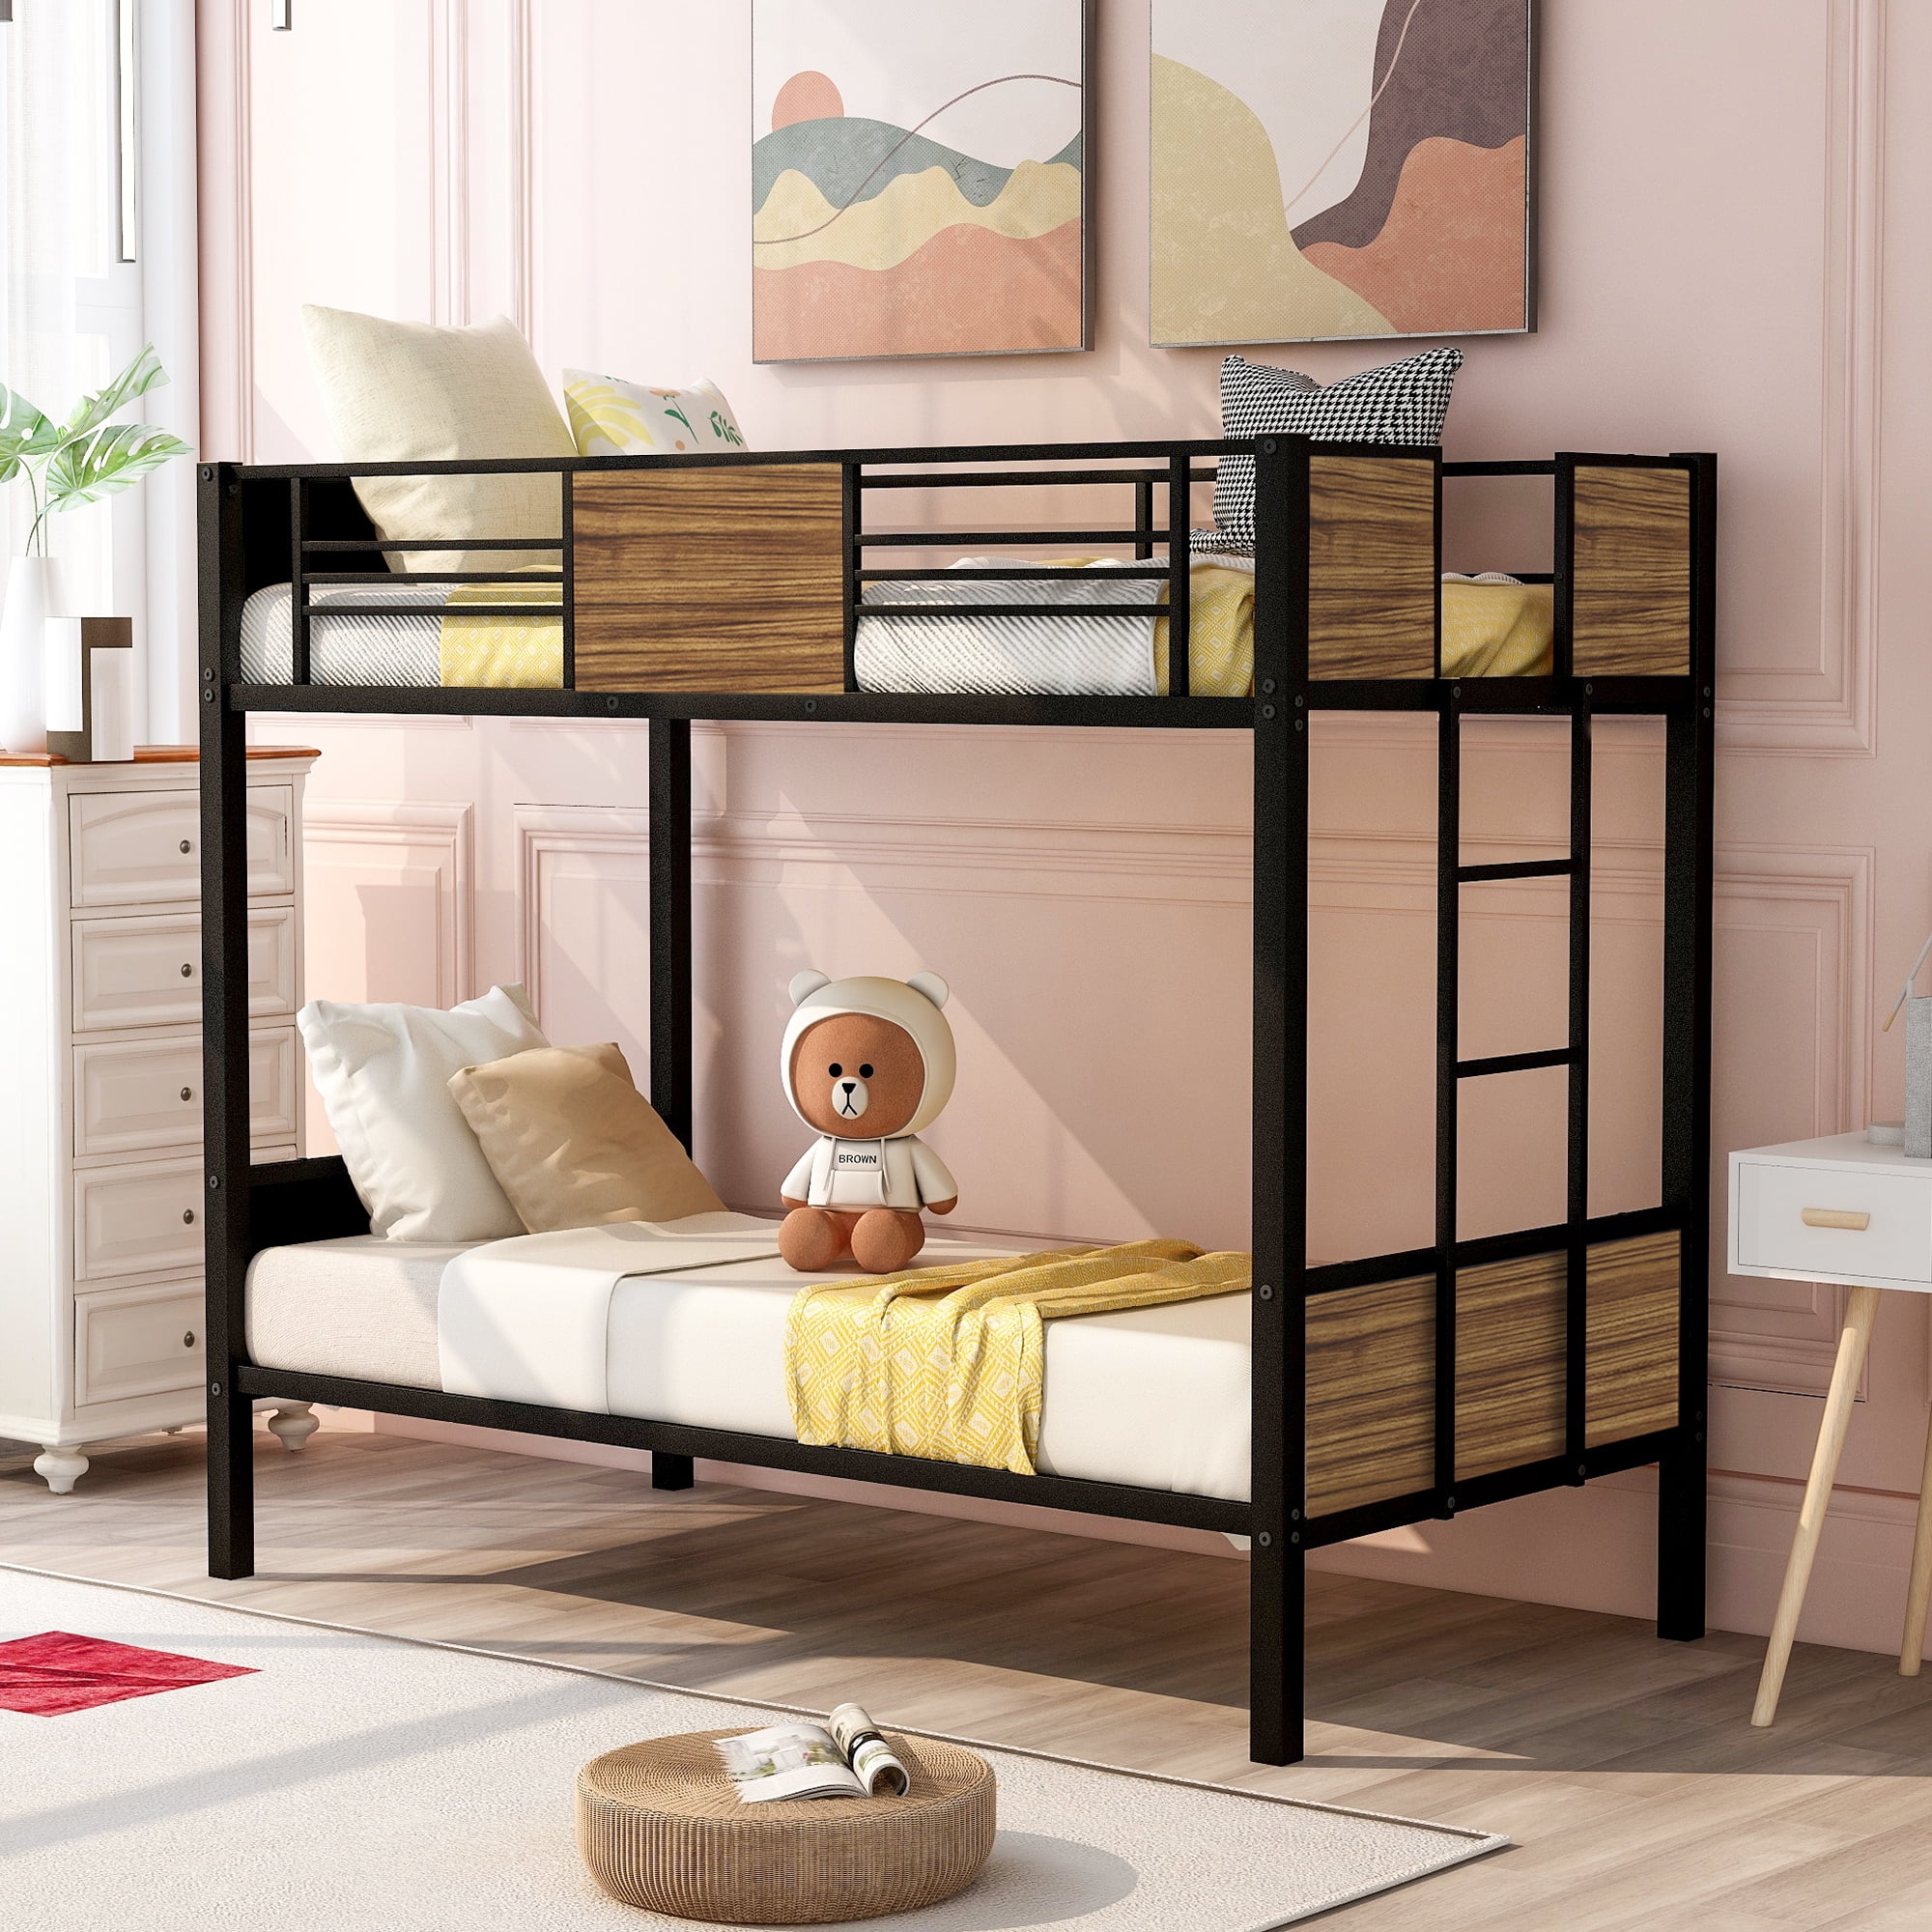 Twin Over Bunk Bed Modern Style, Dorm Room Bunk Bed Rails